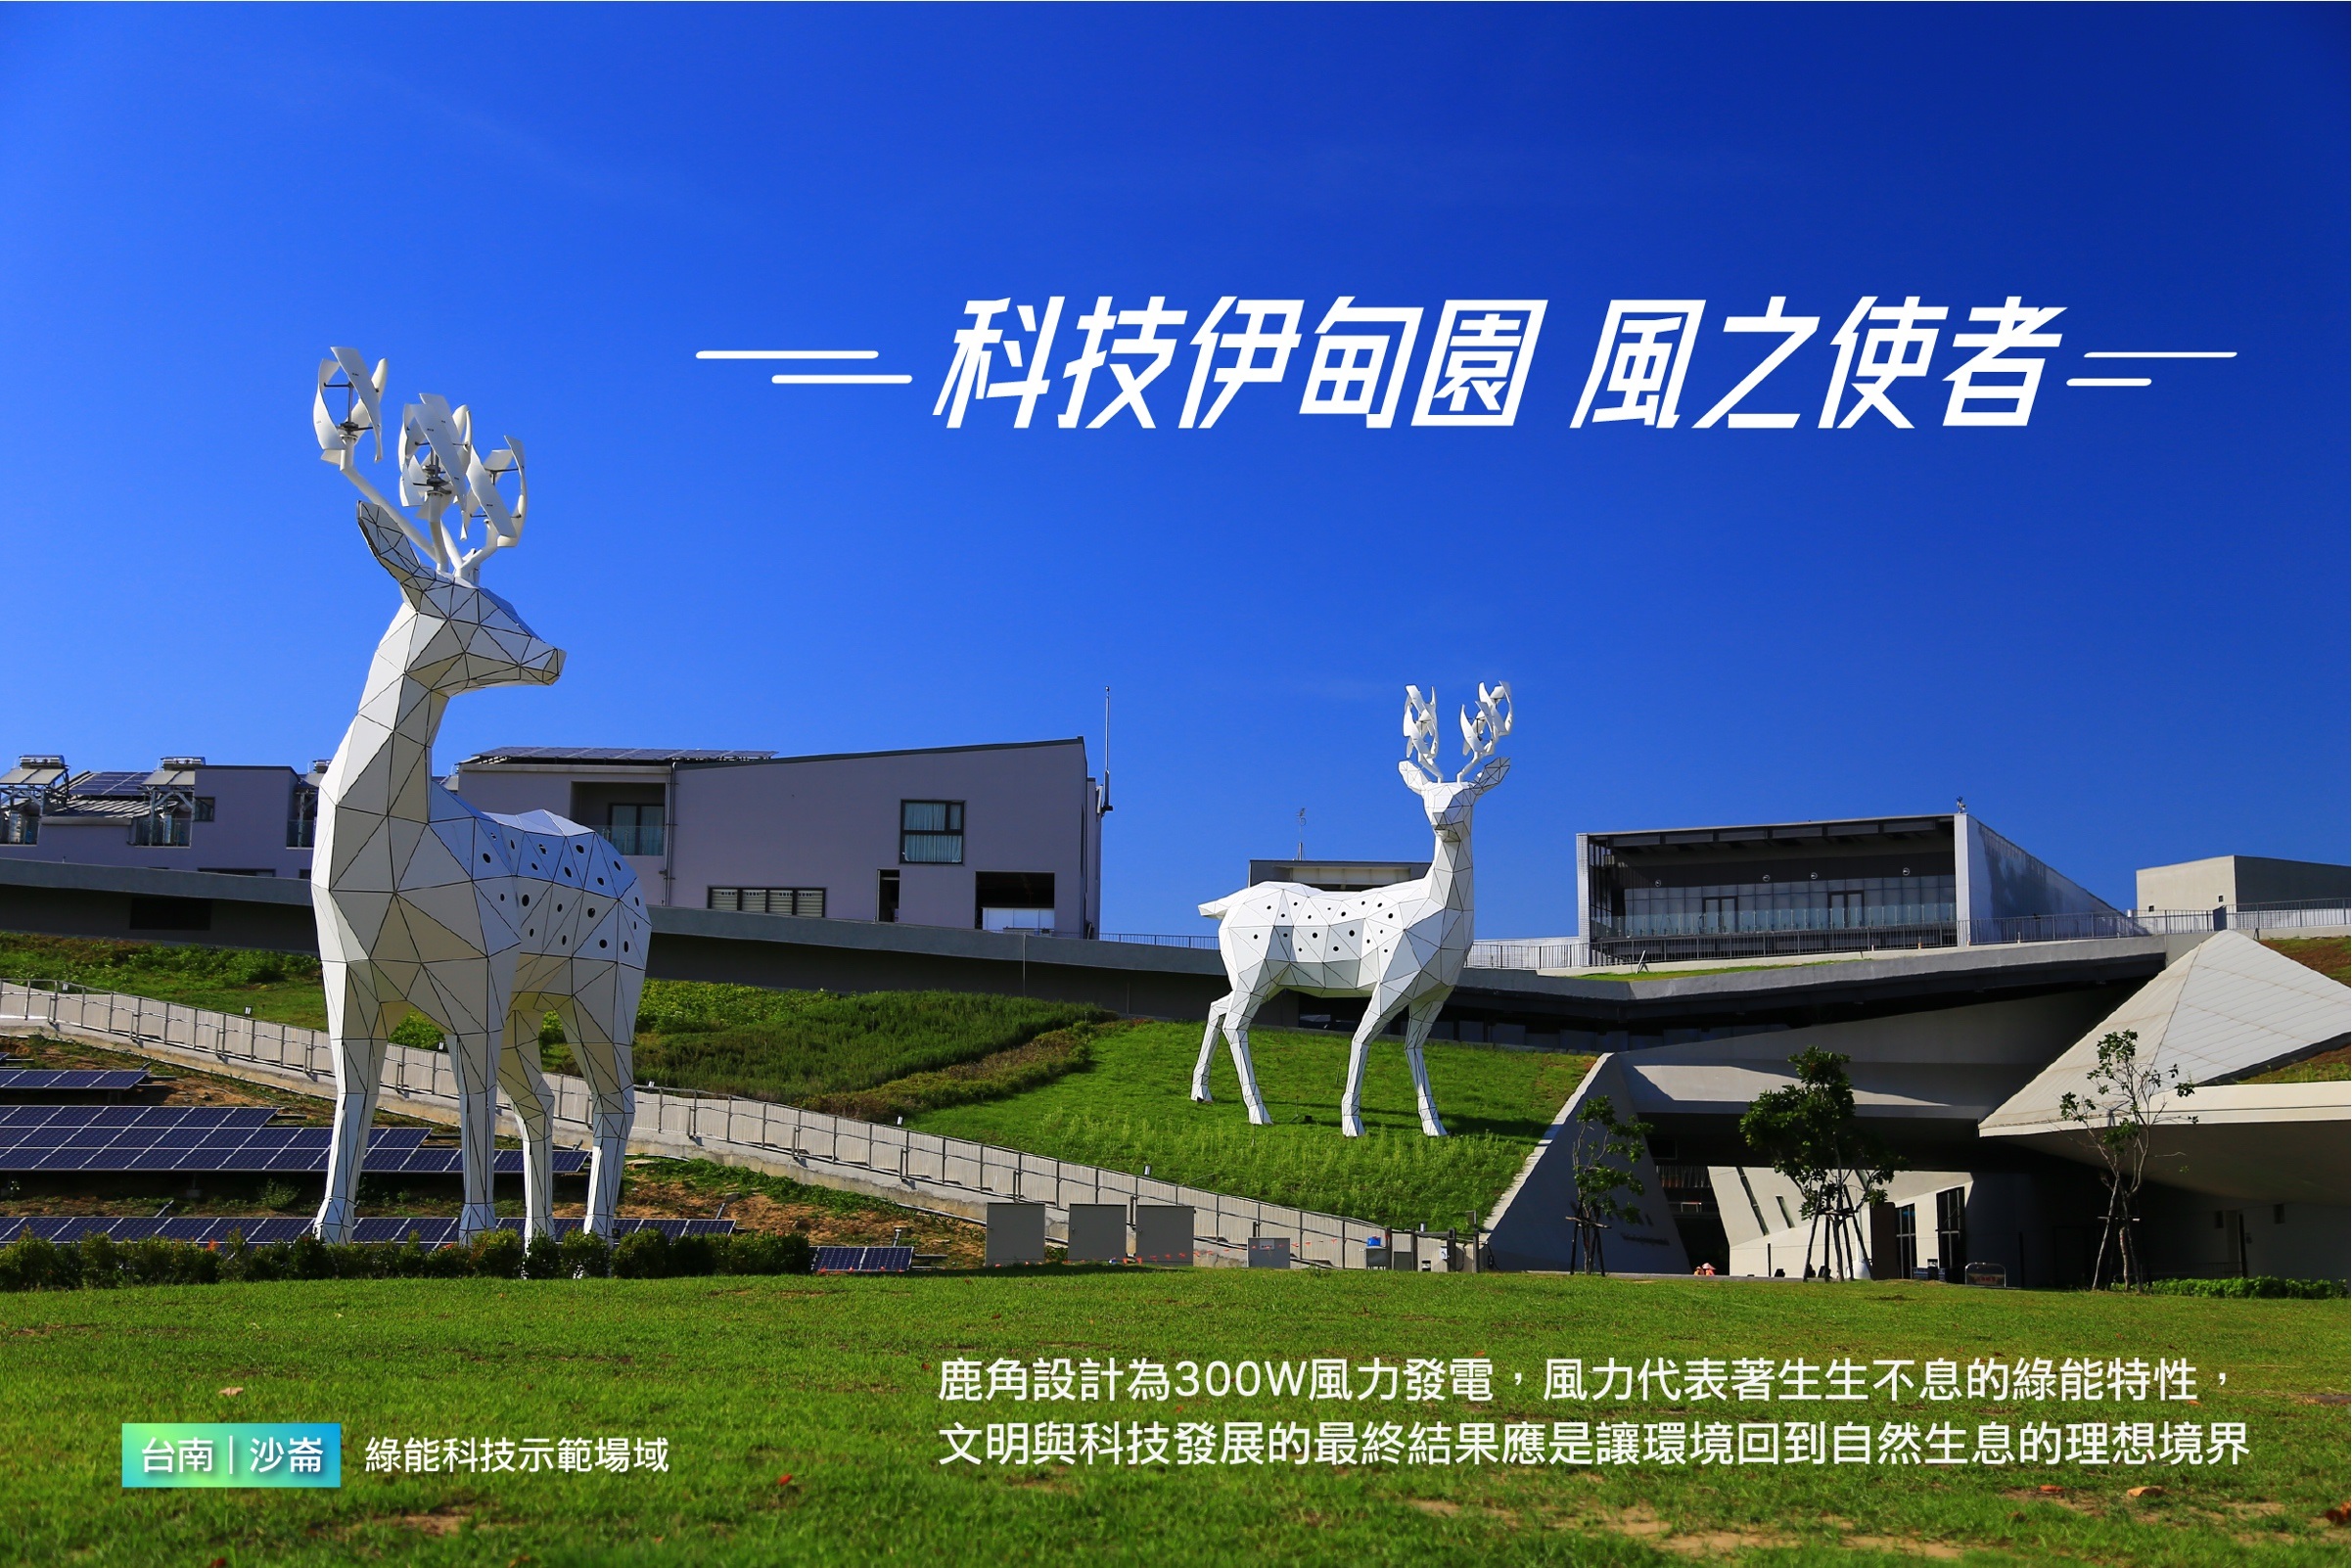 Another Win for the Beauty of Taiwan- Shalun Green Energy Technology Demonstration Site Selected as